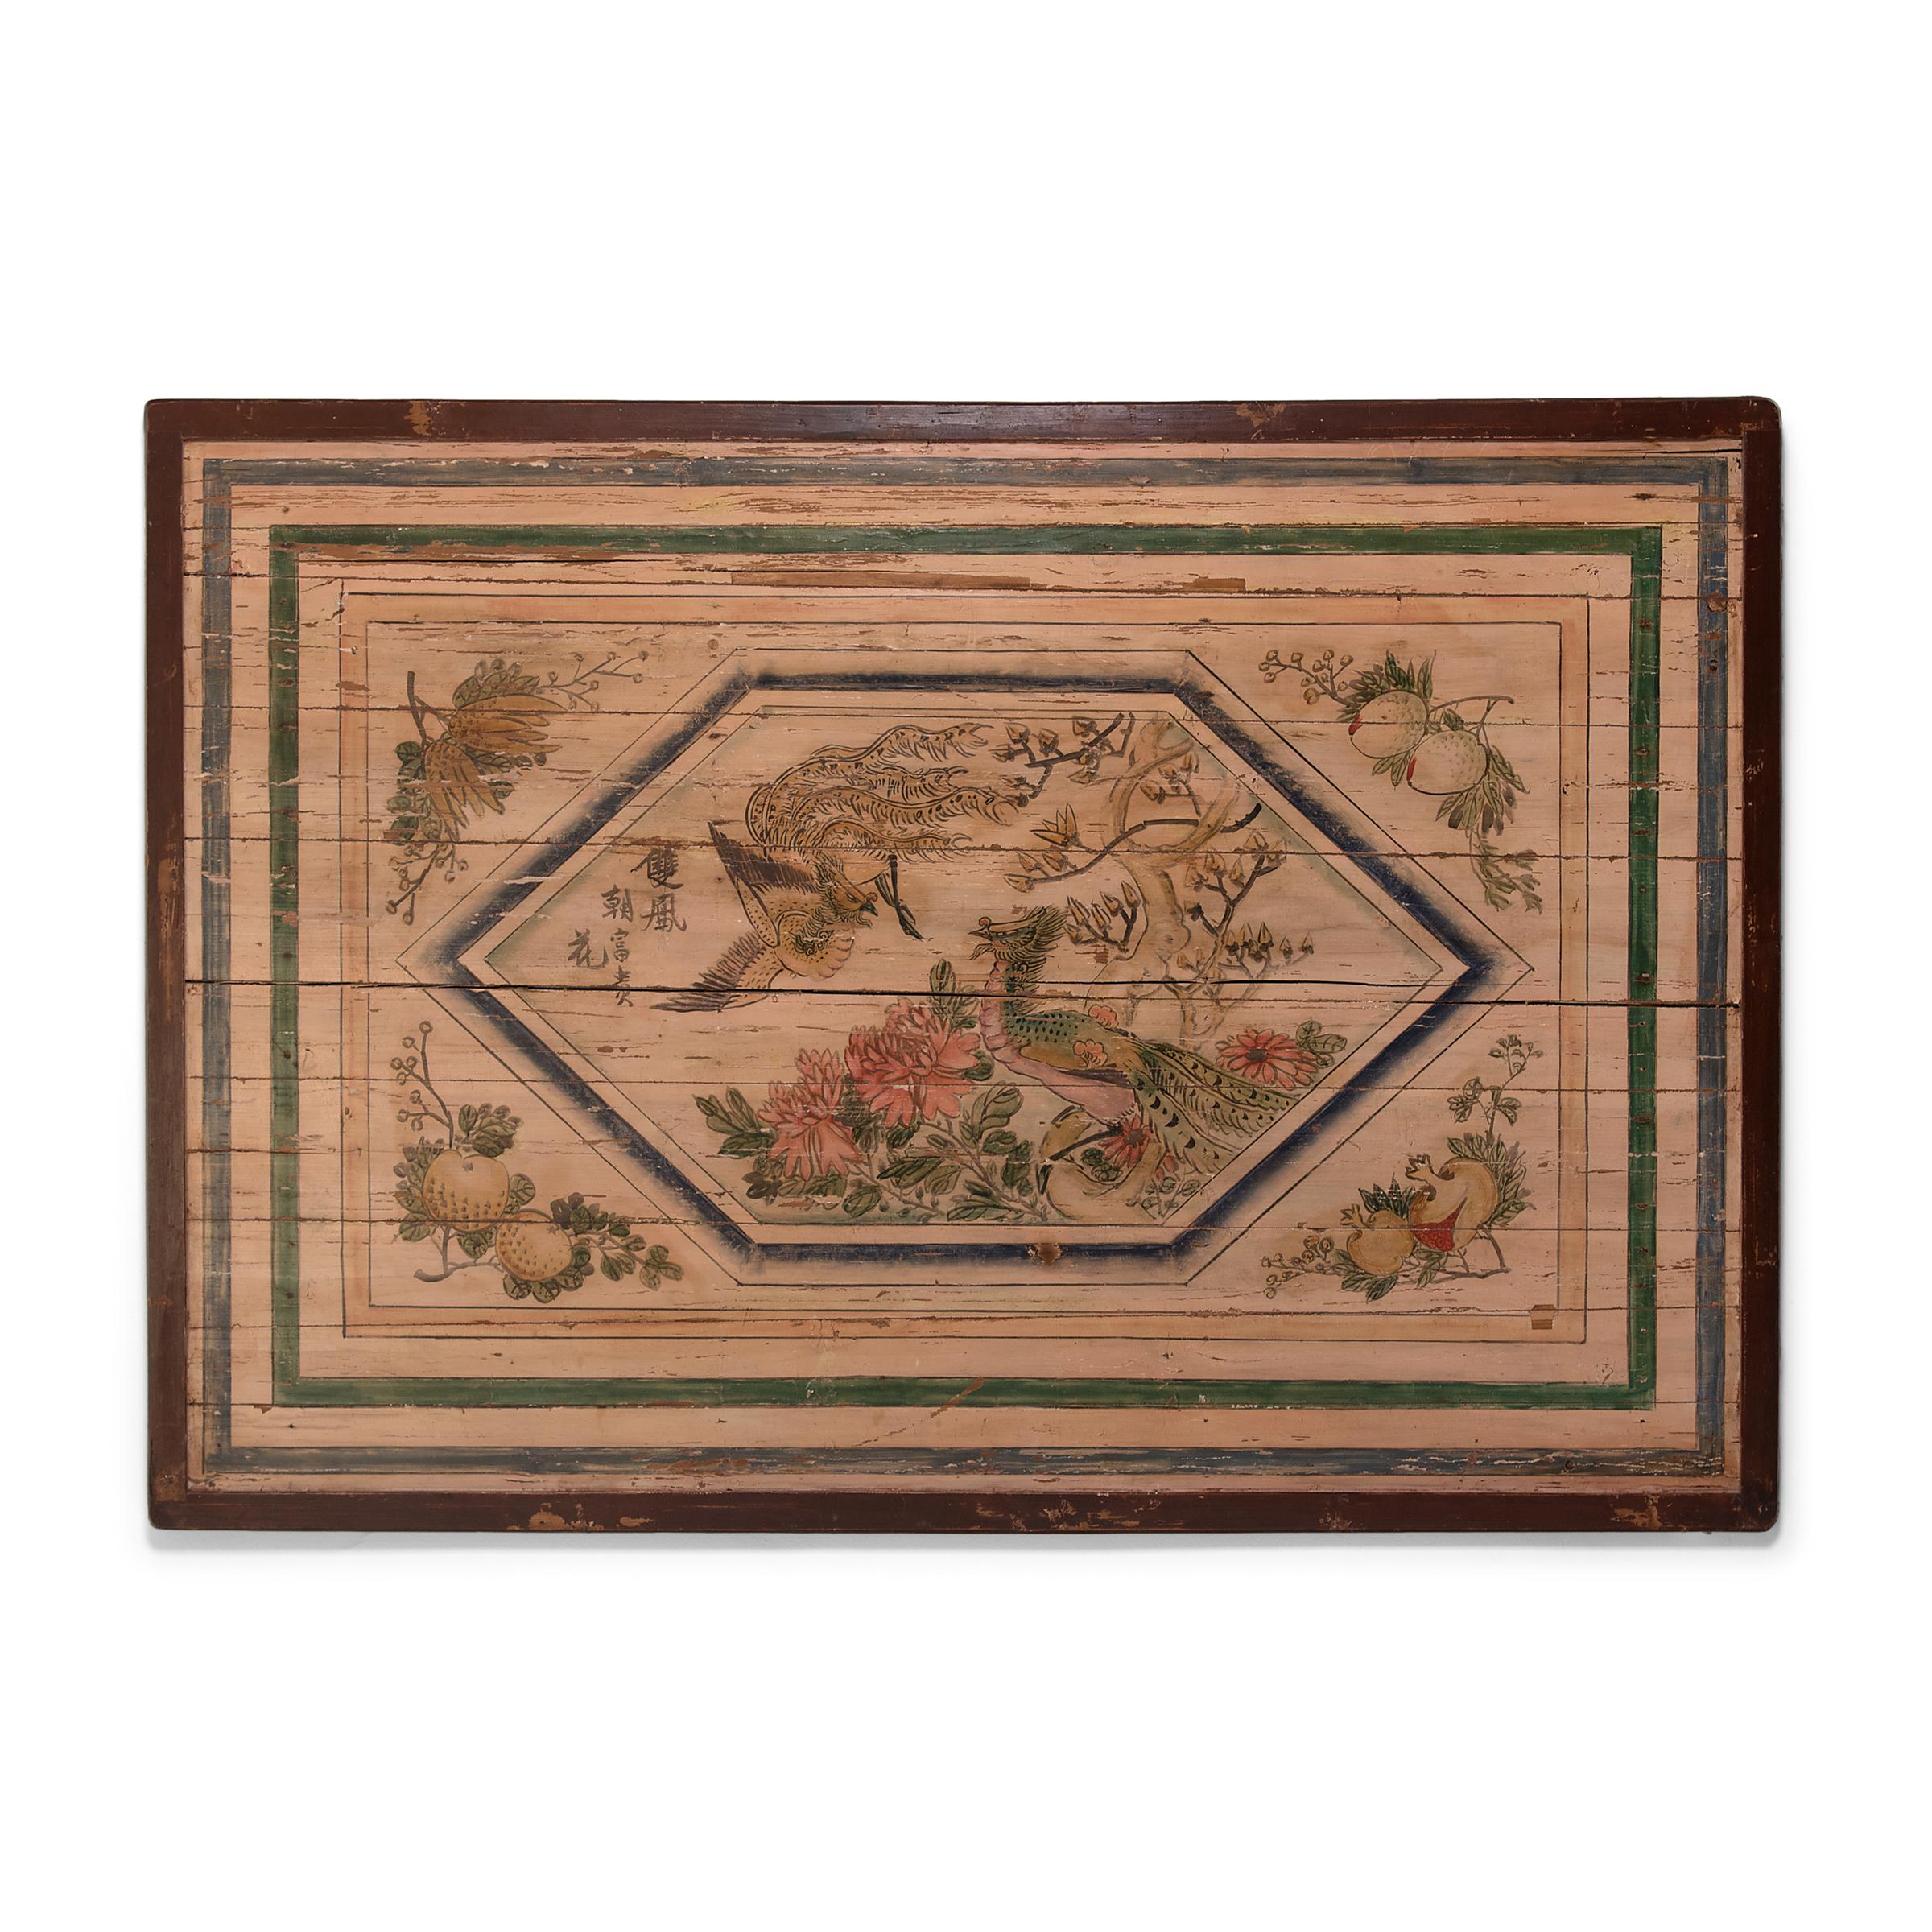 Chinese Bed Canopy of Phoenix and Fruits, Paint on Wood Panel, c. 1850 For Sale 2